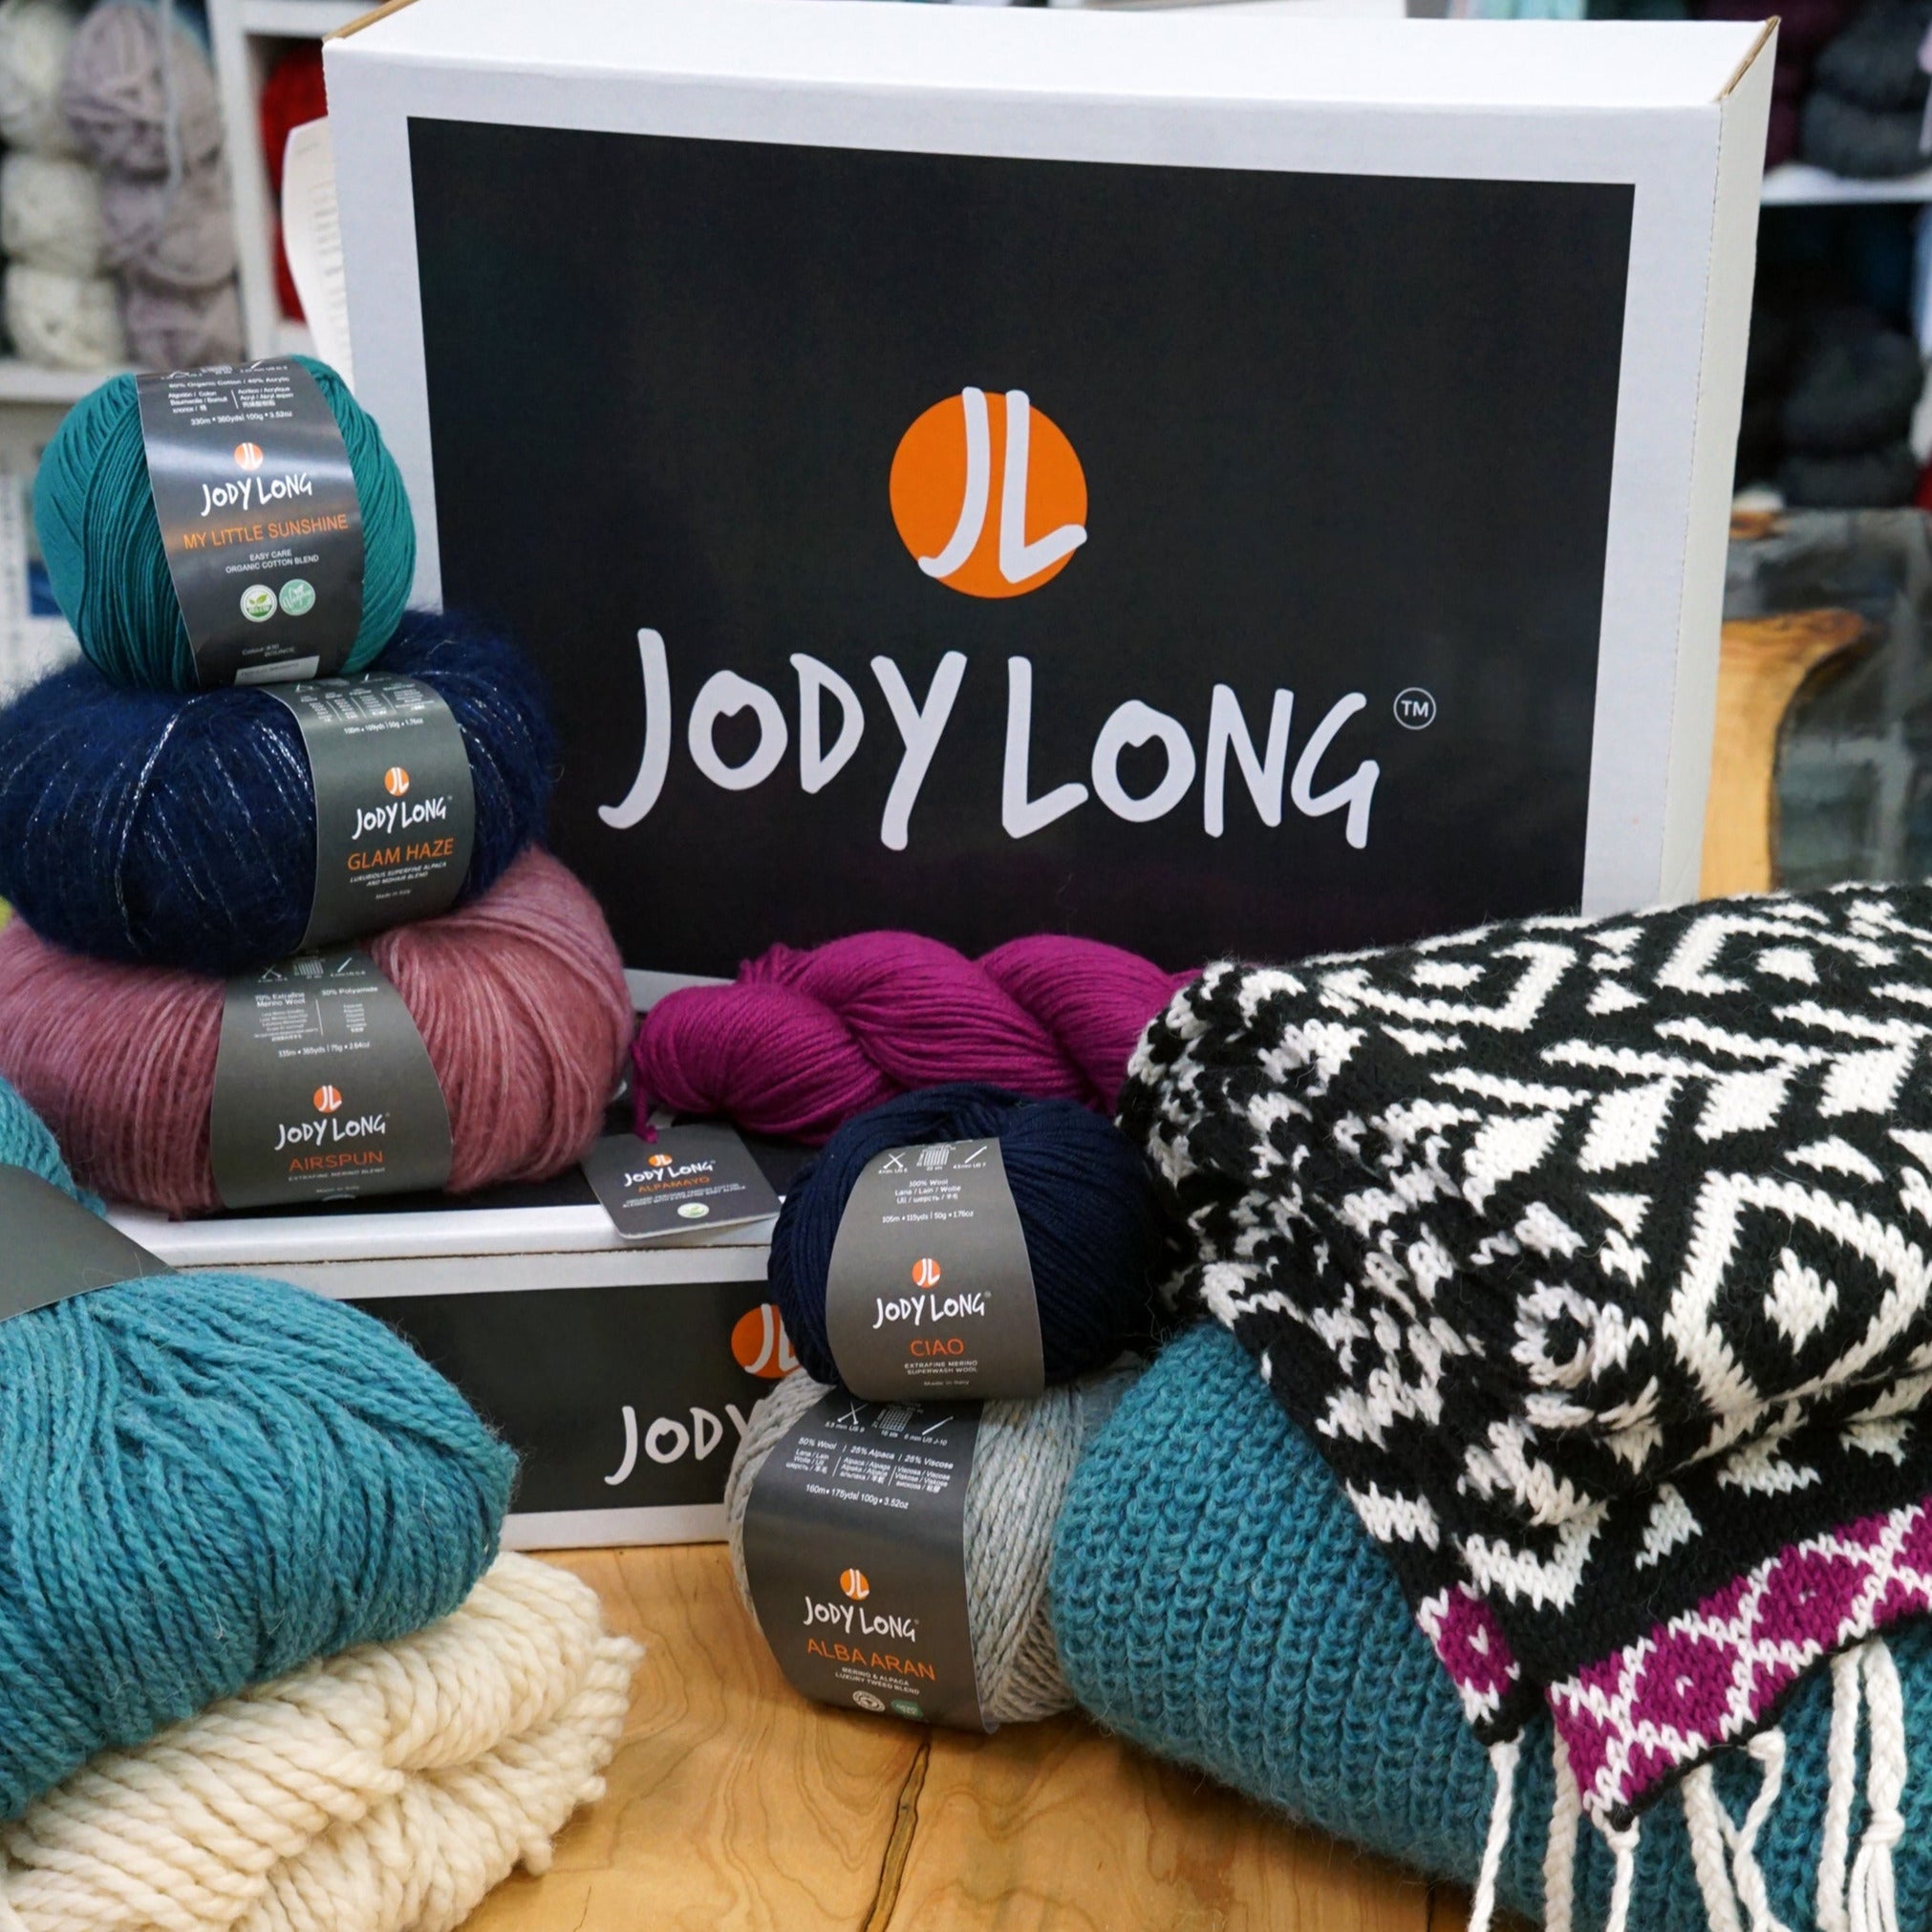 9/16 Jody Long Cables Across America: Meet and Greet & Trunk Show - Free Event